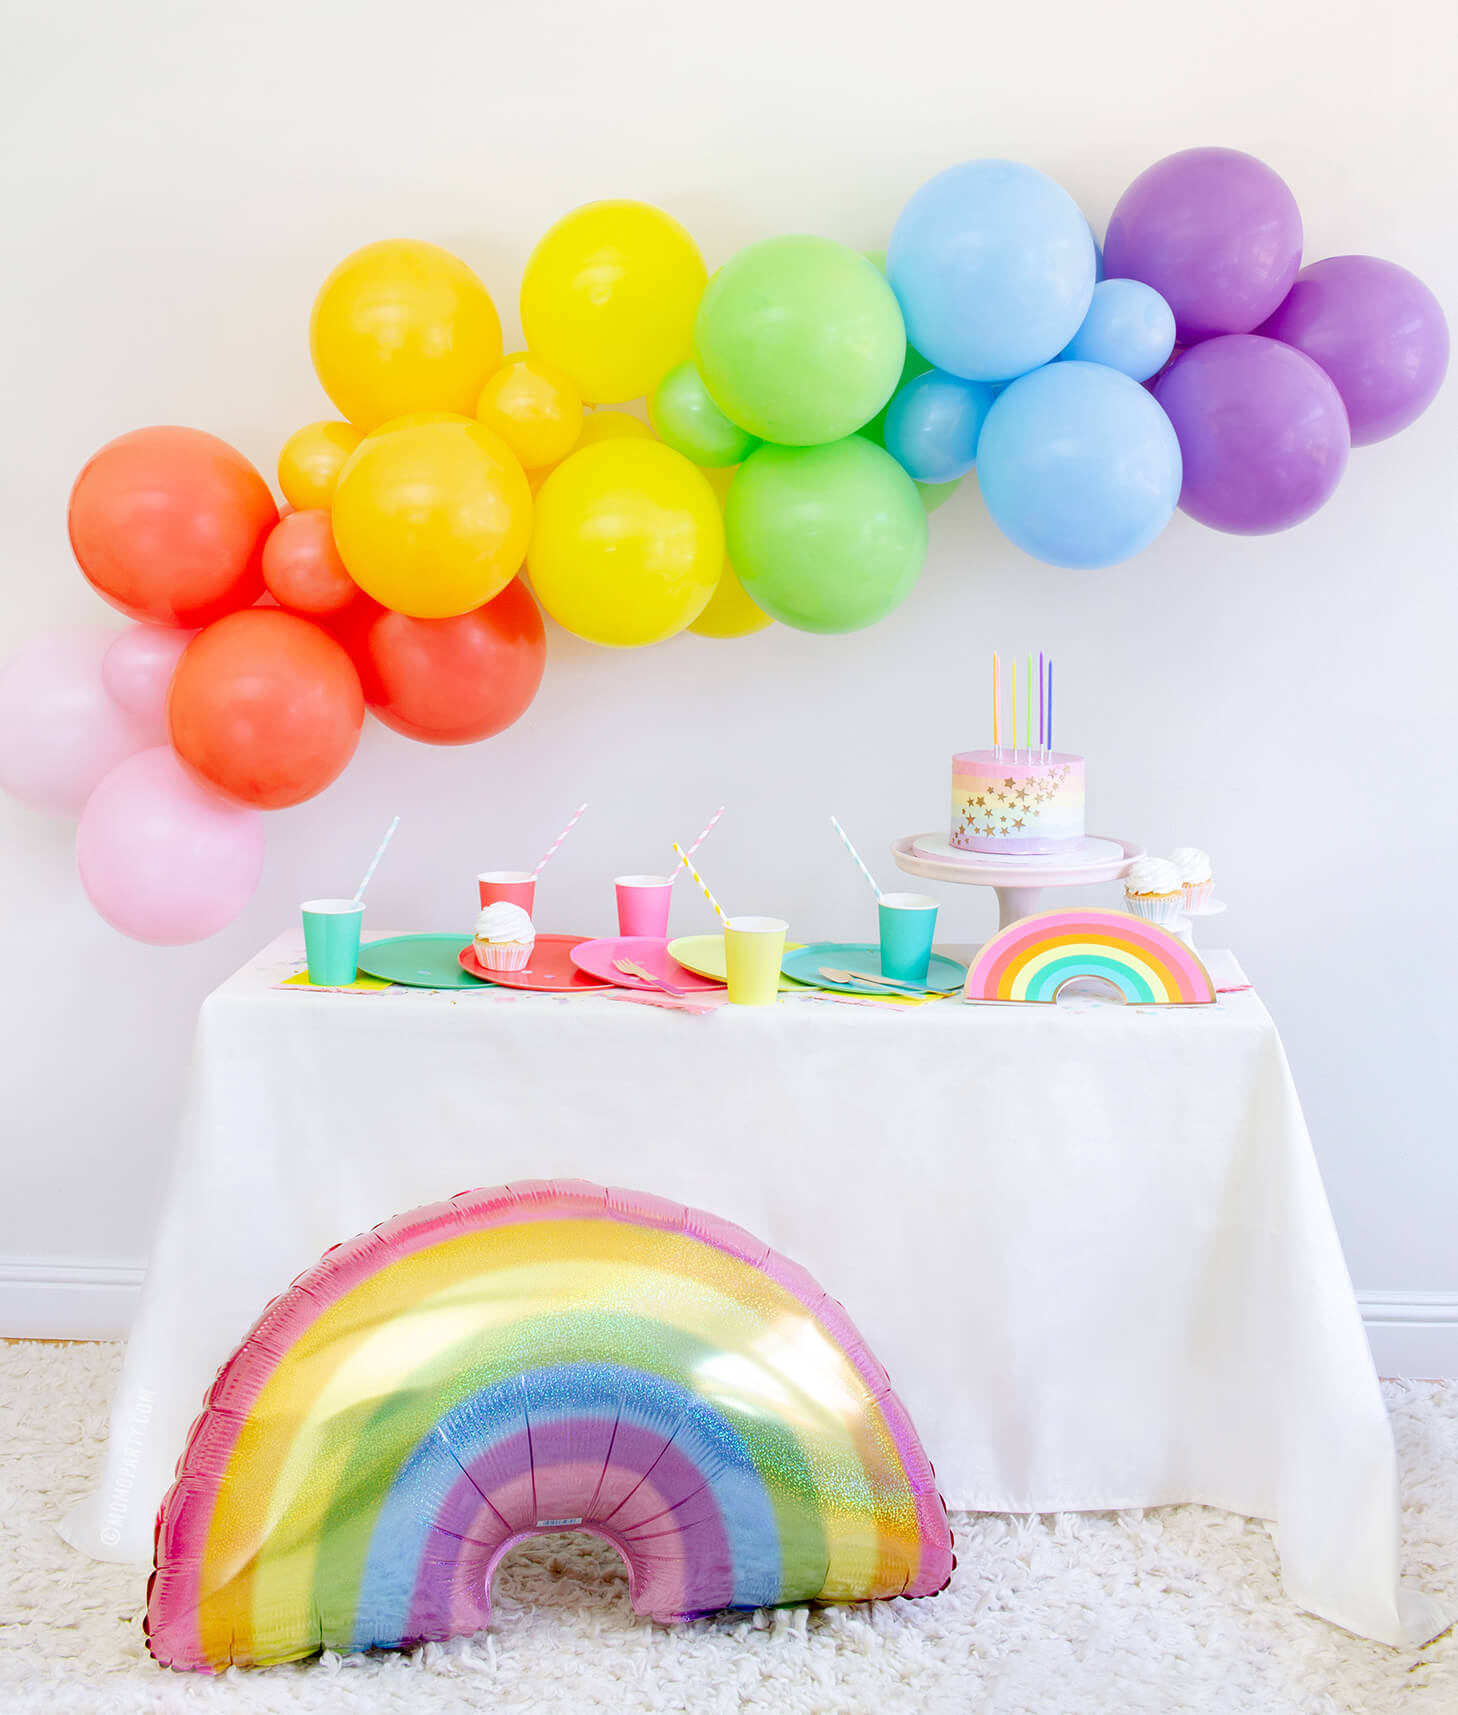 Momo party in a box, Rainbow Modern Party tablewares, Party Supplies, Party inspiration, box included Oh happy Day Large Rainbow Plate Set, Oh happy day Rainbow Plates, Rainbow Cup Set, My minds Eye's Hip Hip Hooray Fringe Small Napkins, Hyper Tropical Wooden Cutlery Set, Mixed Pastel Striped Straws, Holographic Pastel Glitter Rainbow Foil Balloon, Mixed Rainbow colored Balloon Garland, for kids Rainbow themed birthday party, Pride Party